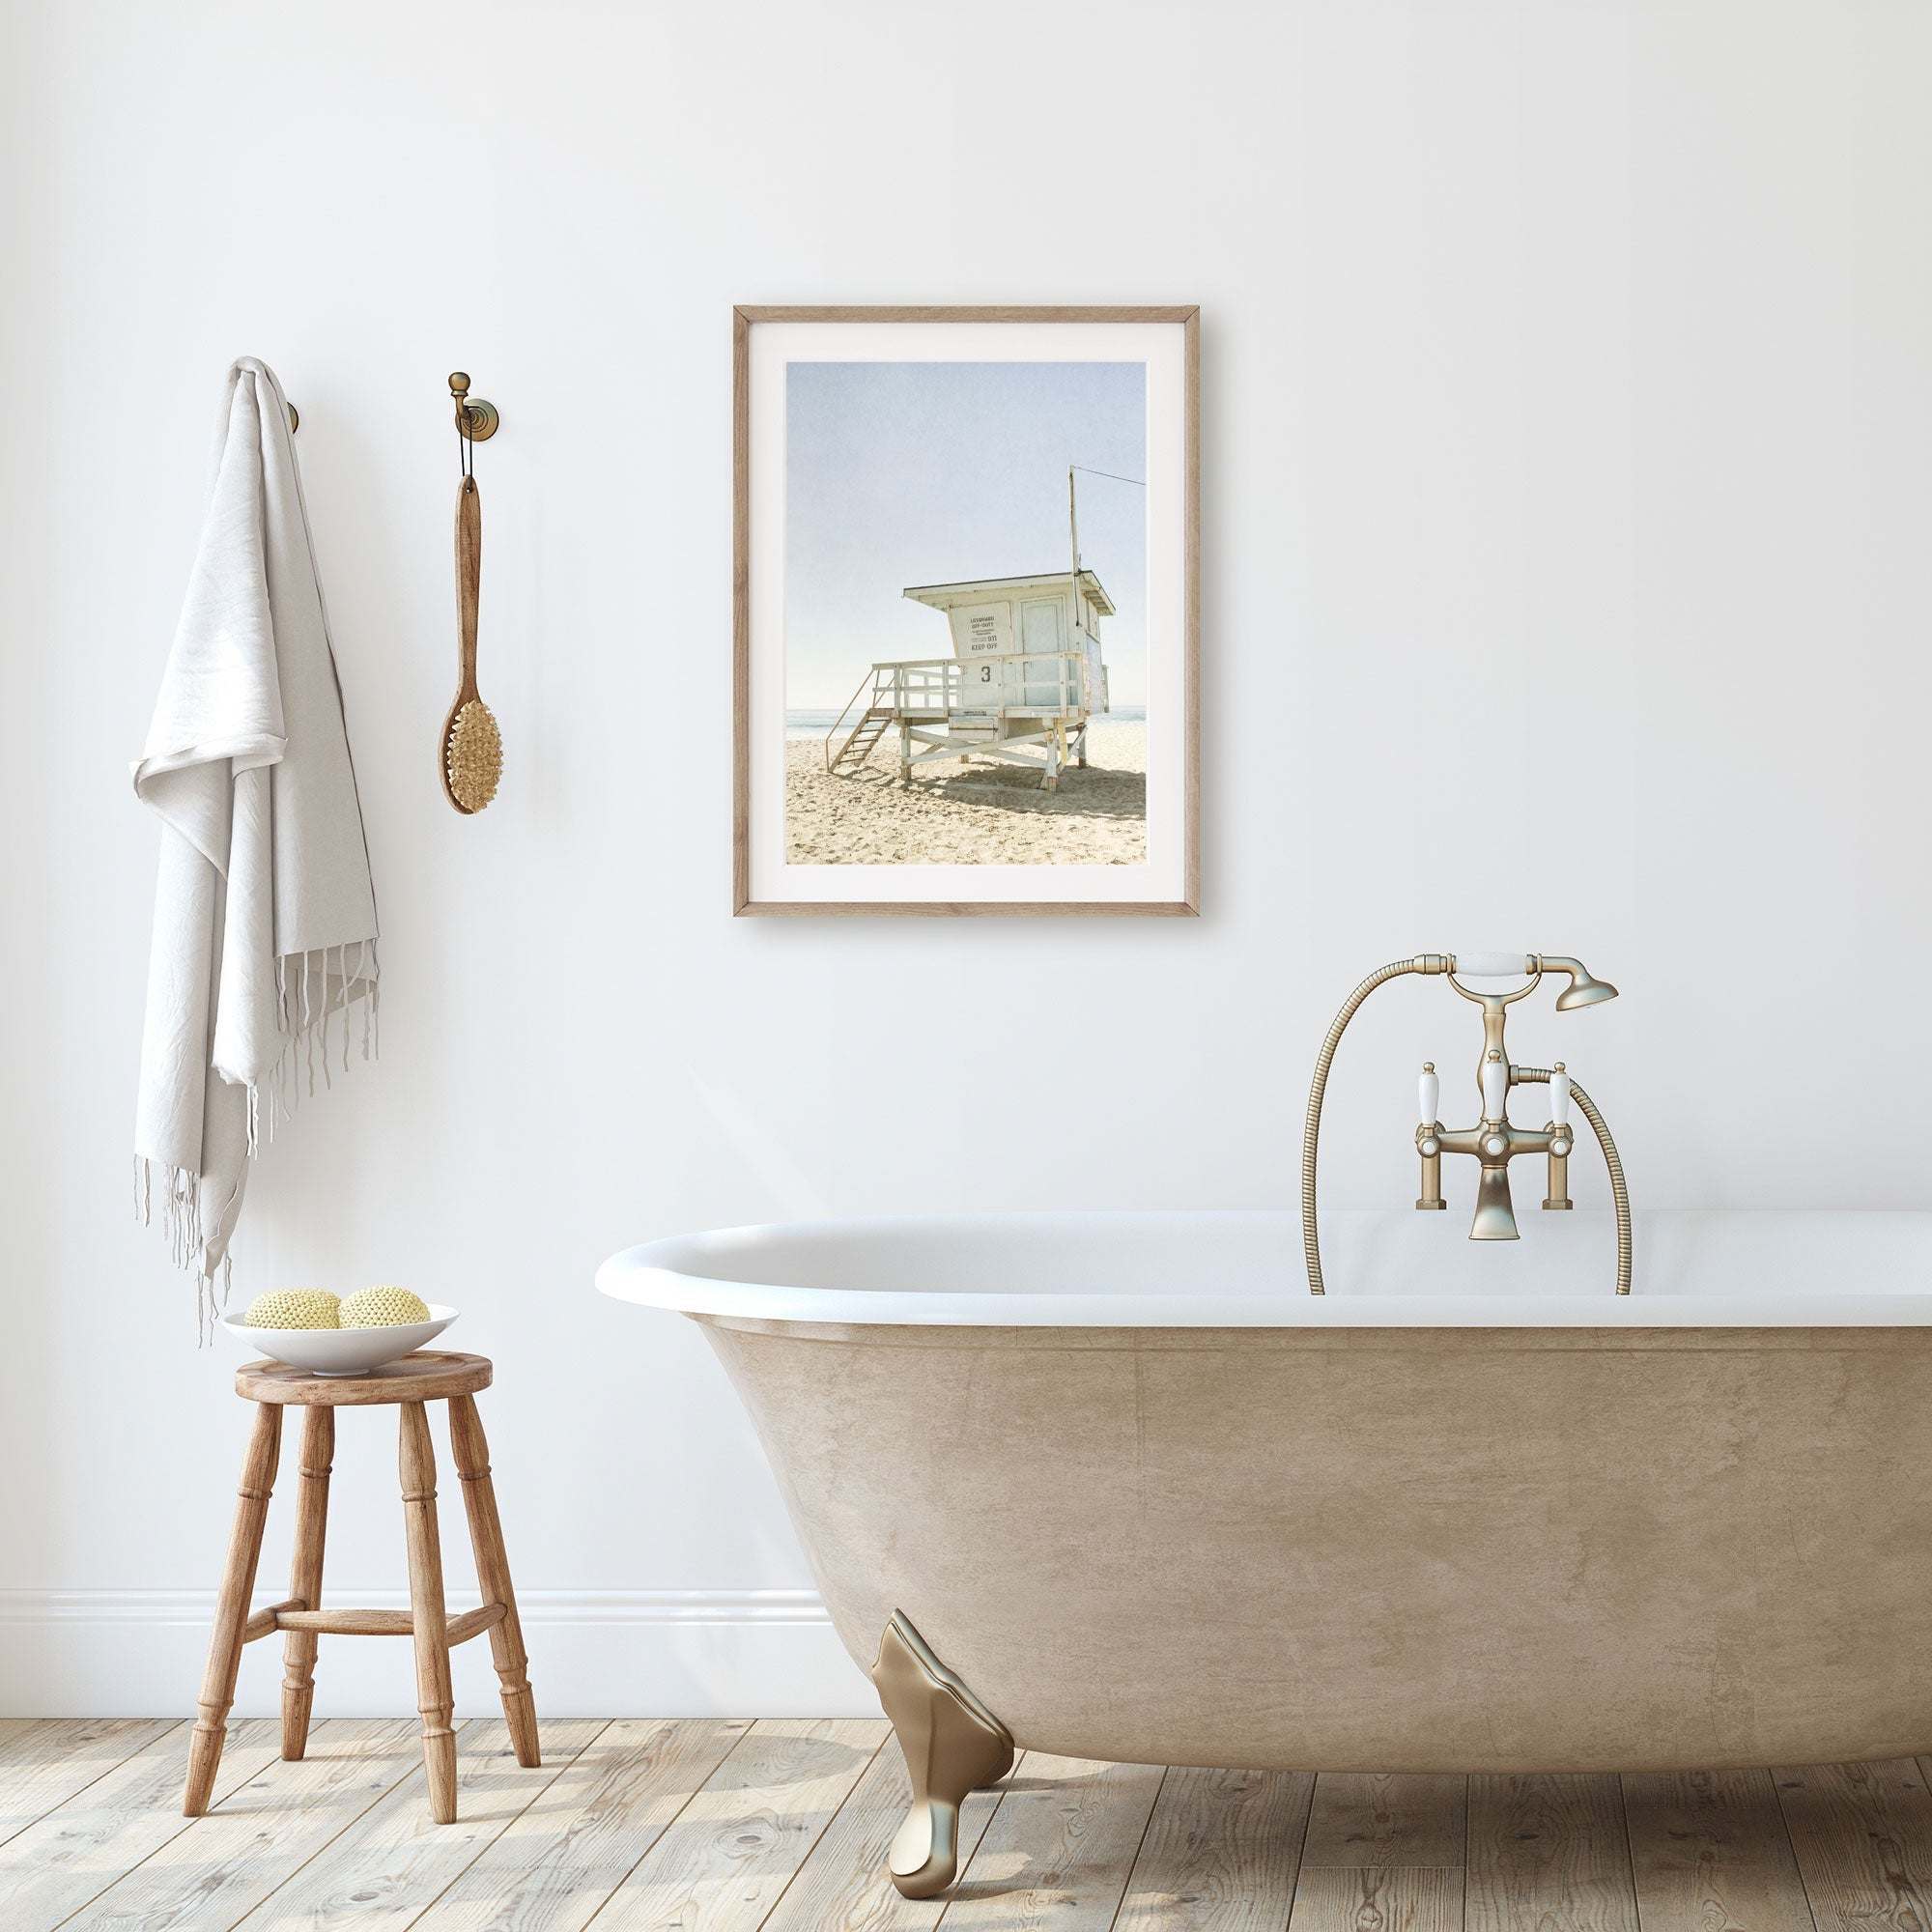 A minimalist bathroom with a classic clawfoot tub near a wooden stool with sponges, next to a wall with an unframed California Malibu Beach Print, 'Surfrider Lifeguard' photograph, and towels hanging on hooks by Offley Green.